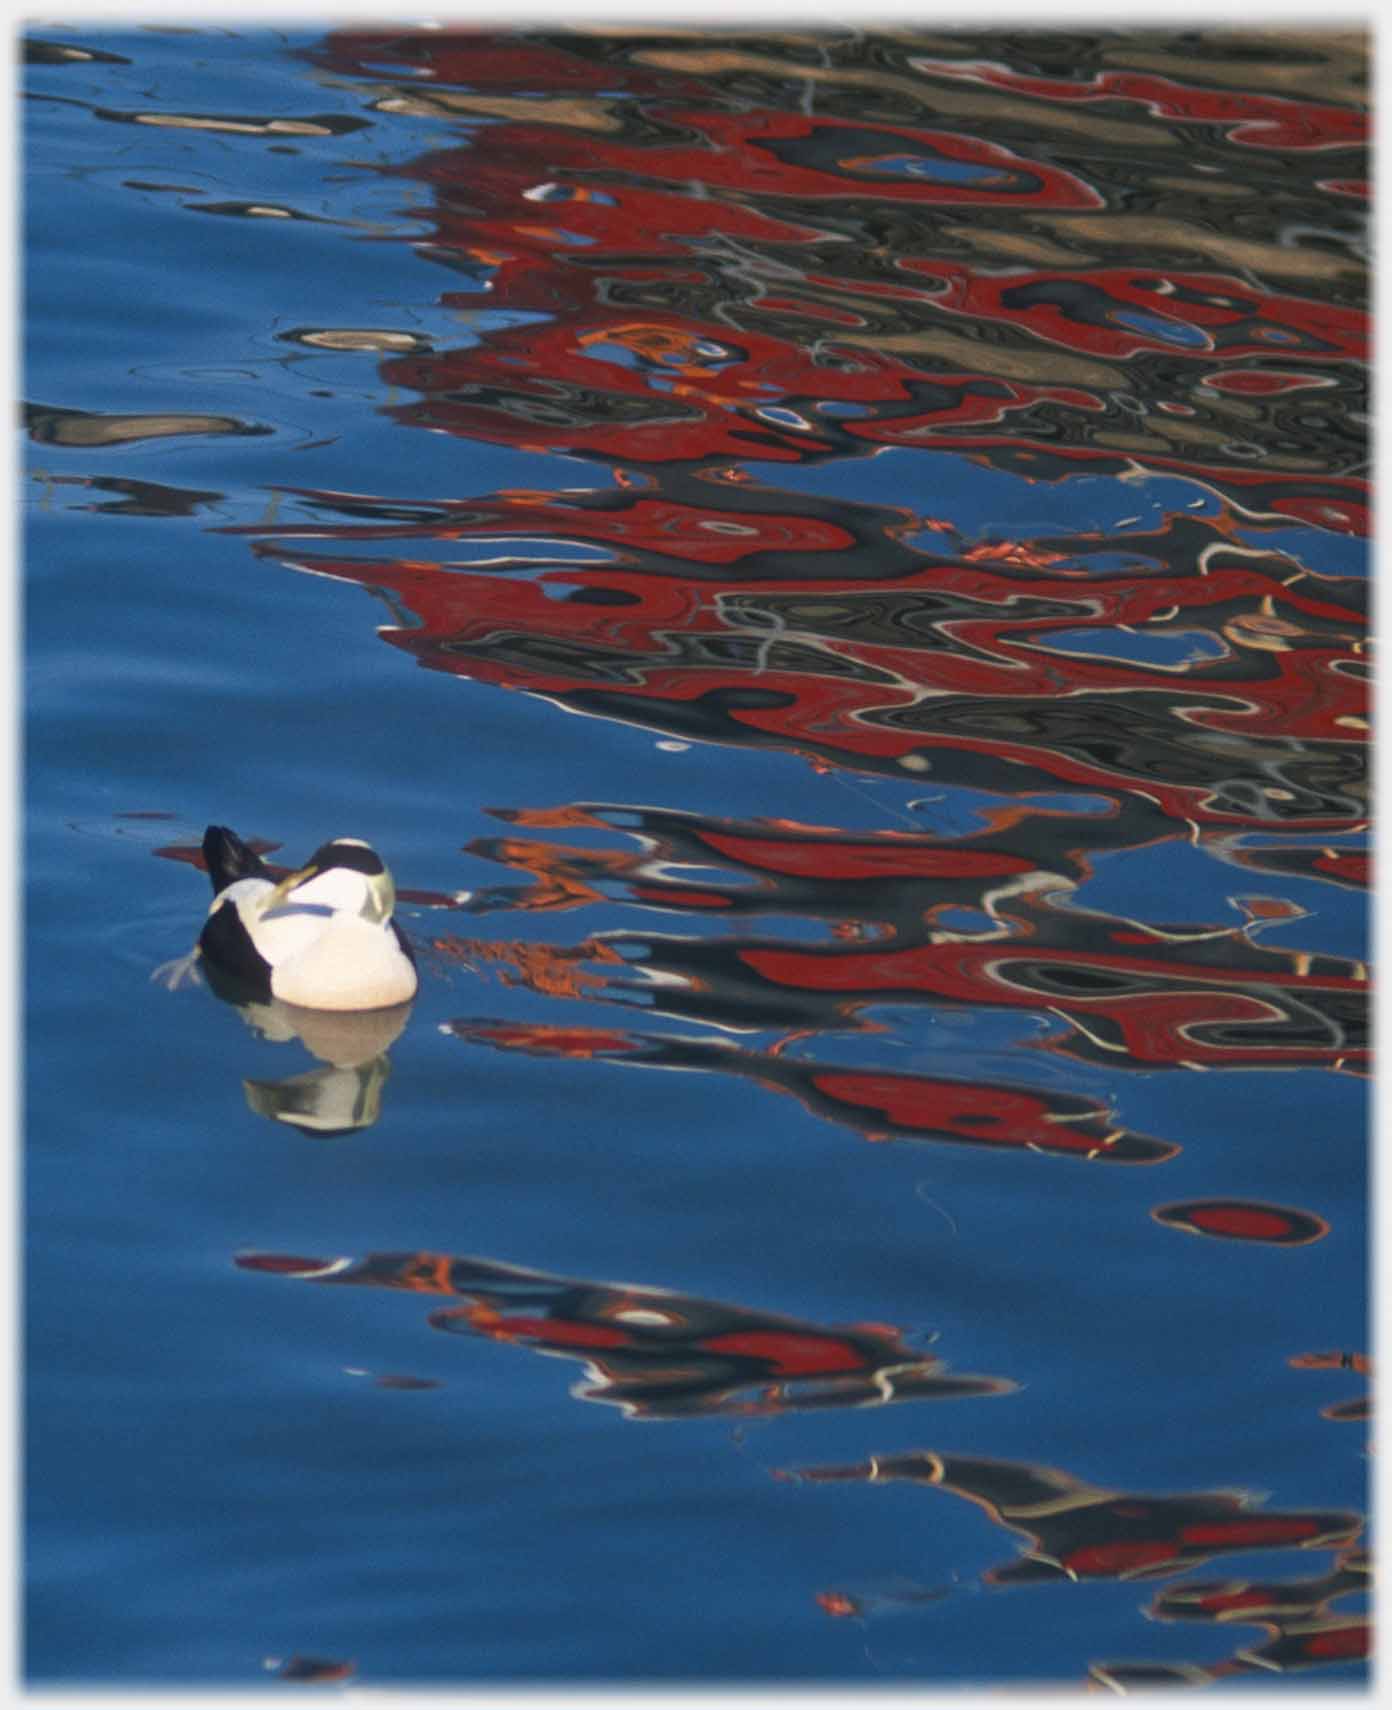 Eider with head turned in rippled water showing red reflections.